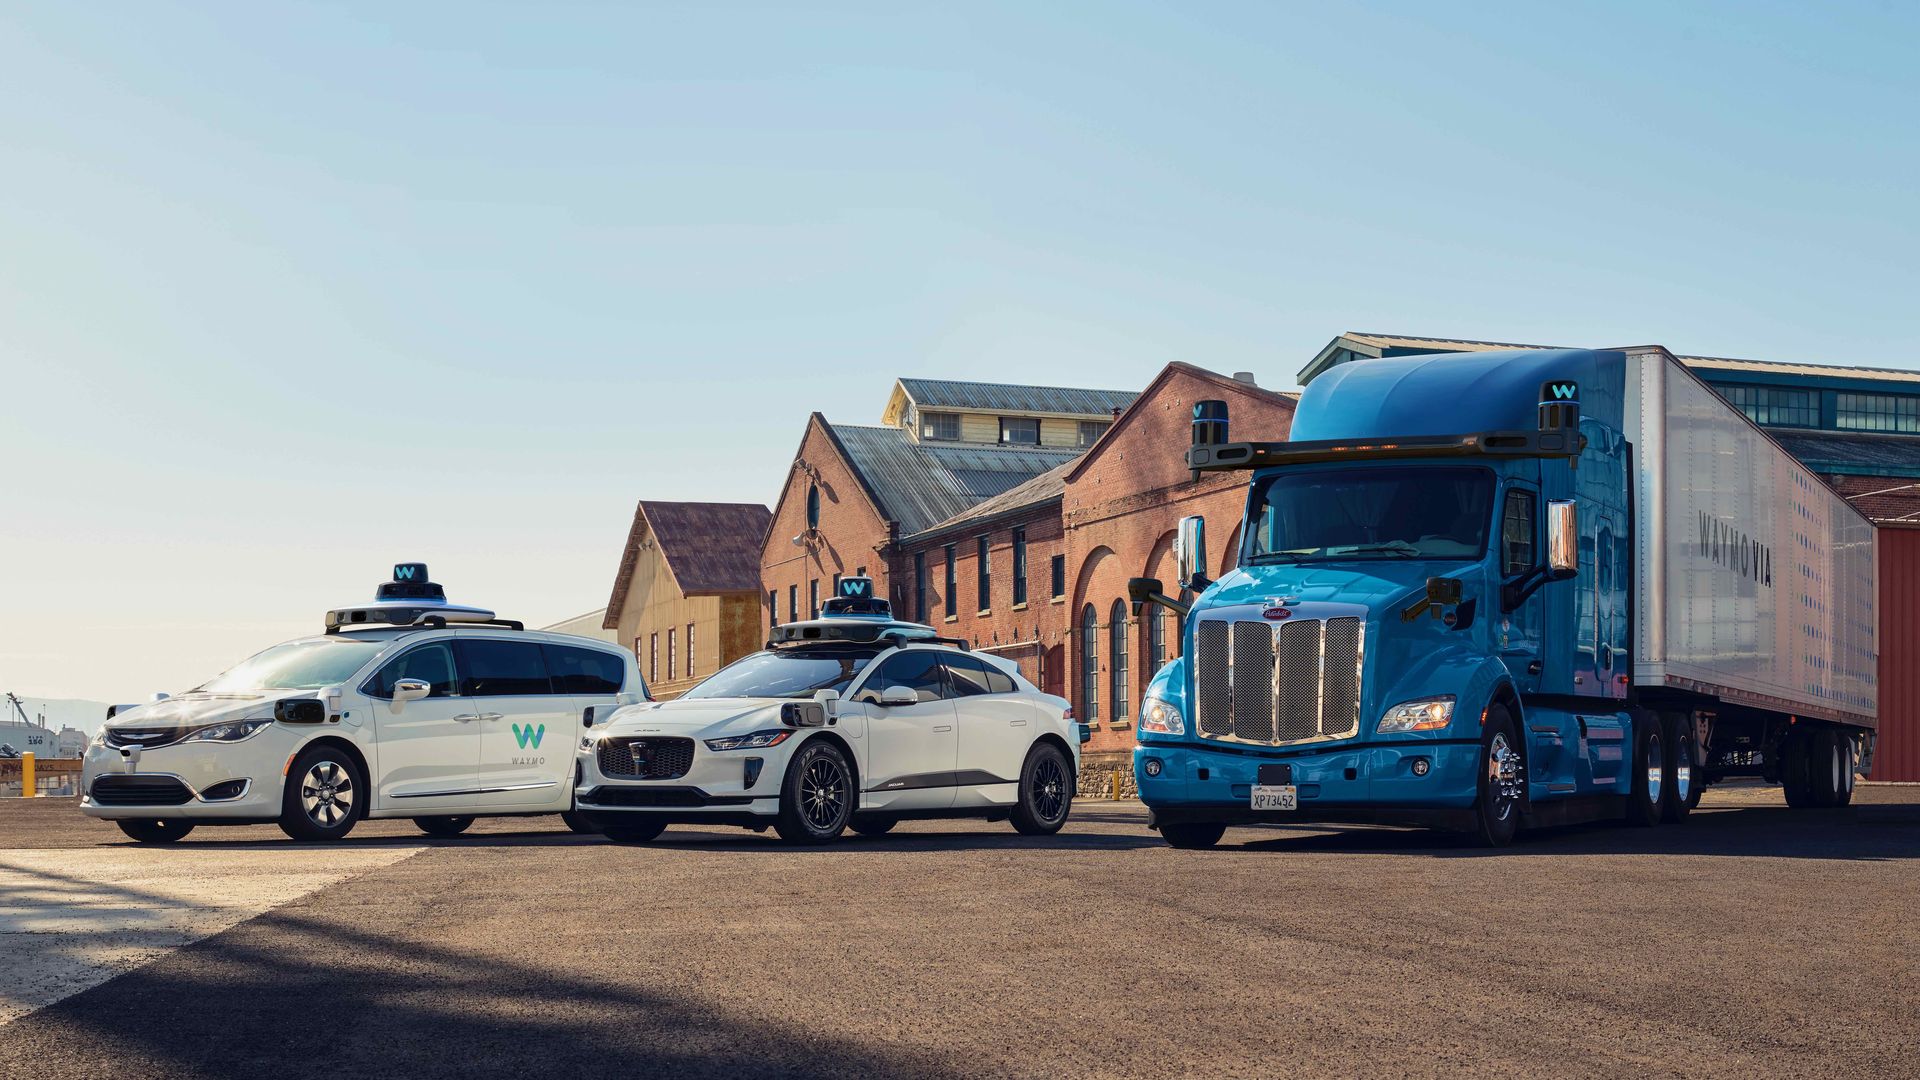 Image of Waymo's self-driving lineup, including a Pacifica minivan, Jaguar iPace and semi-truck.